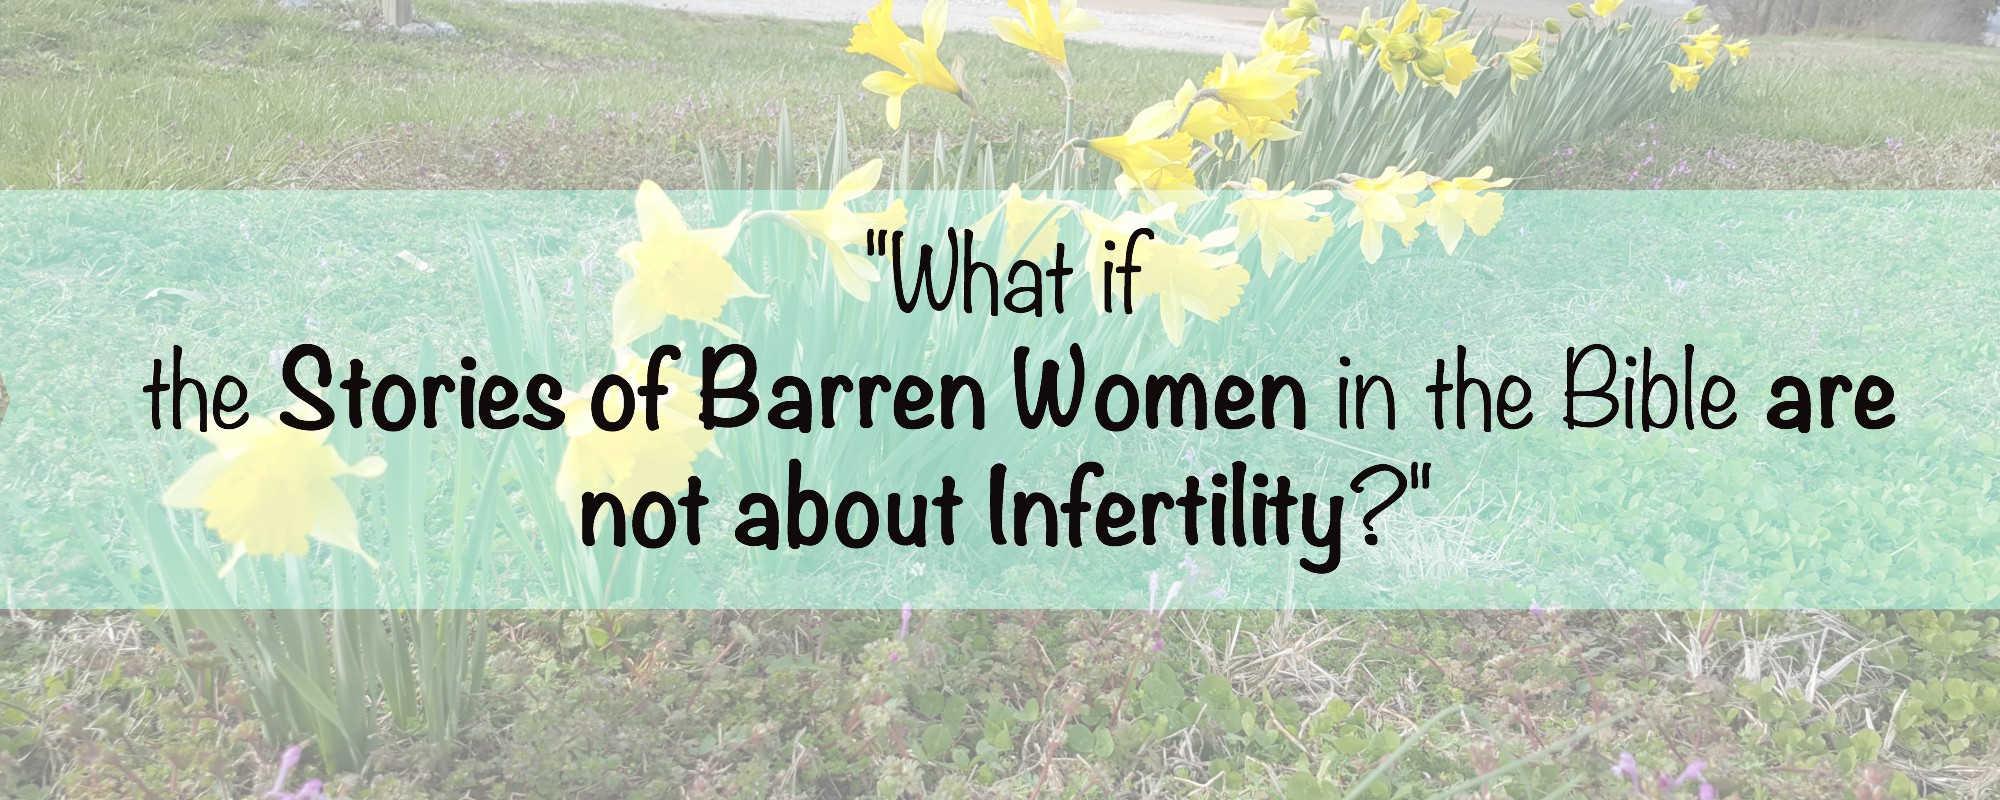 What if the Stories of Barren Women in the Bible are not about Infertility?